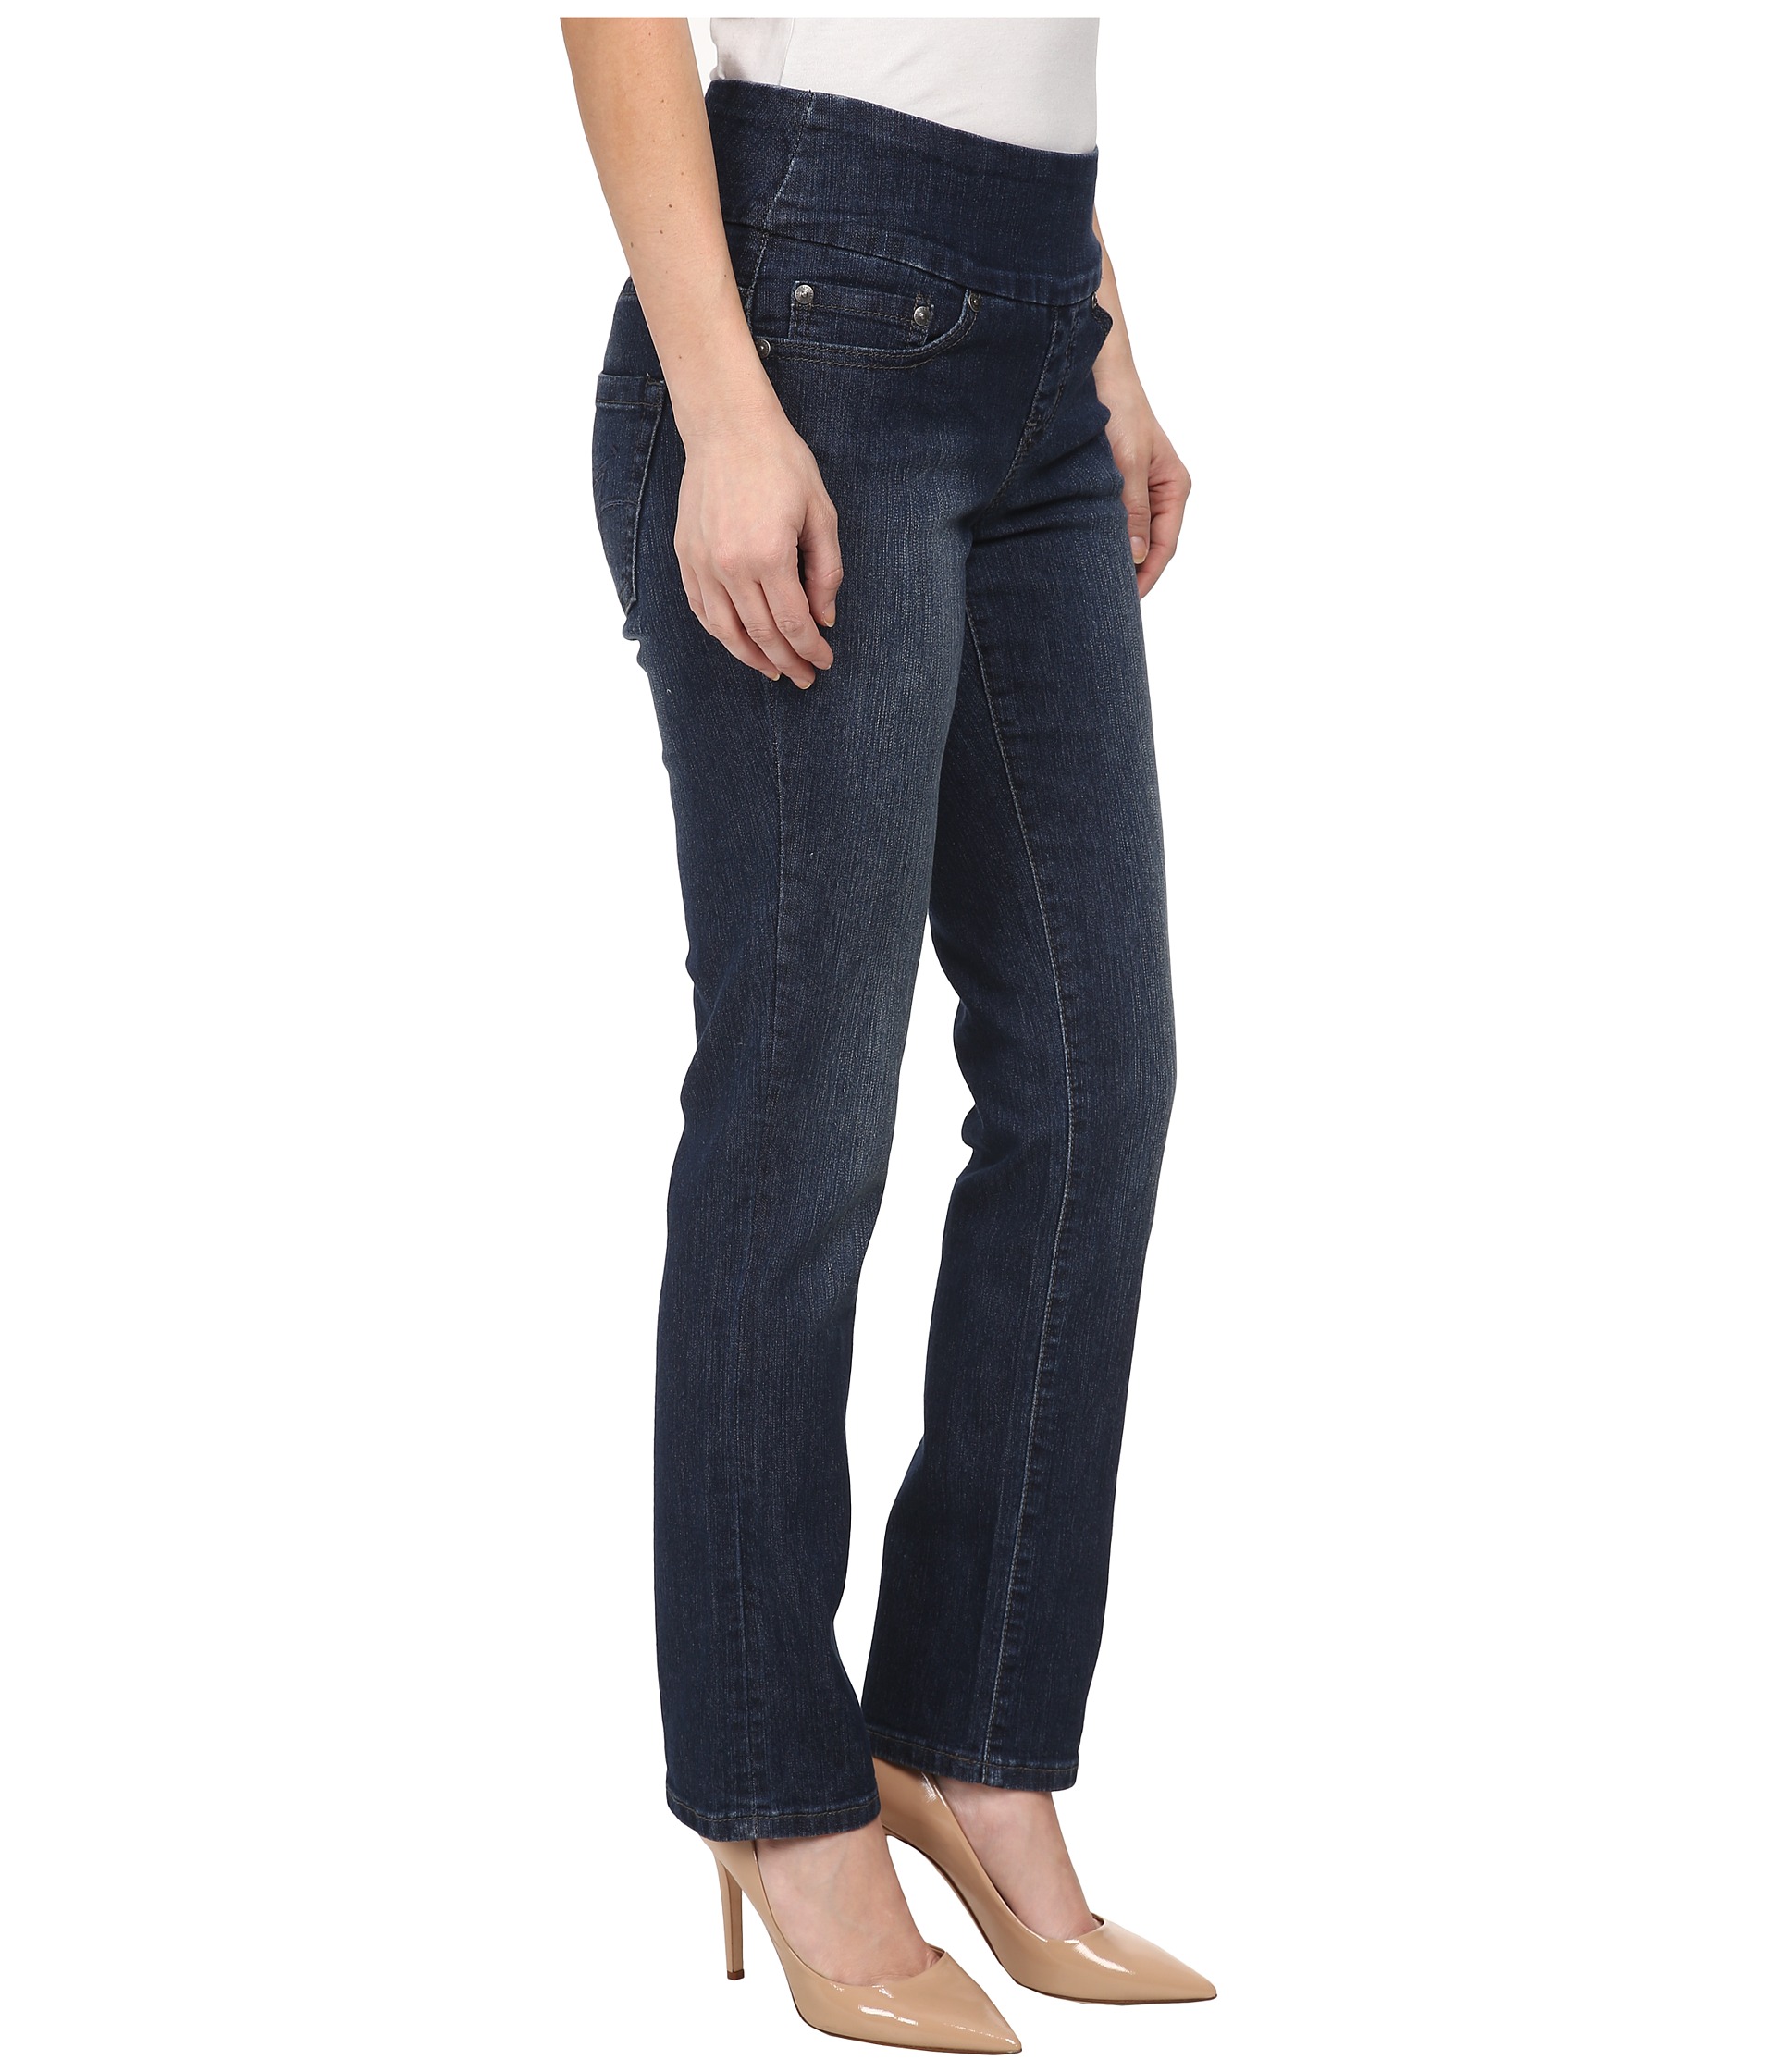 Jag Jeans Petite Petite Peri Pull-On Straight in Anchor Blue at Zappos.com